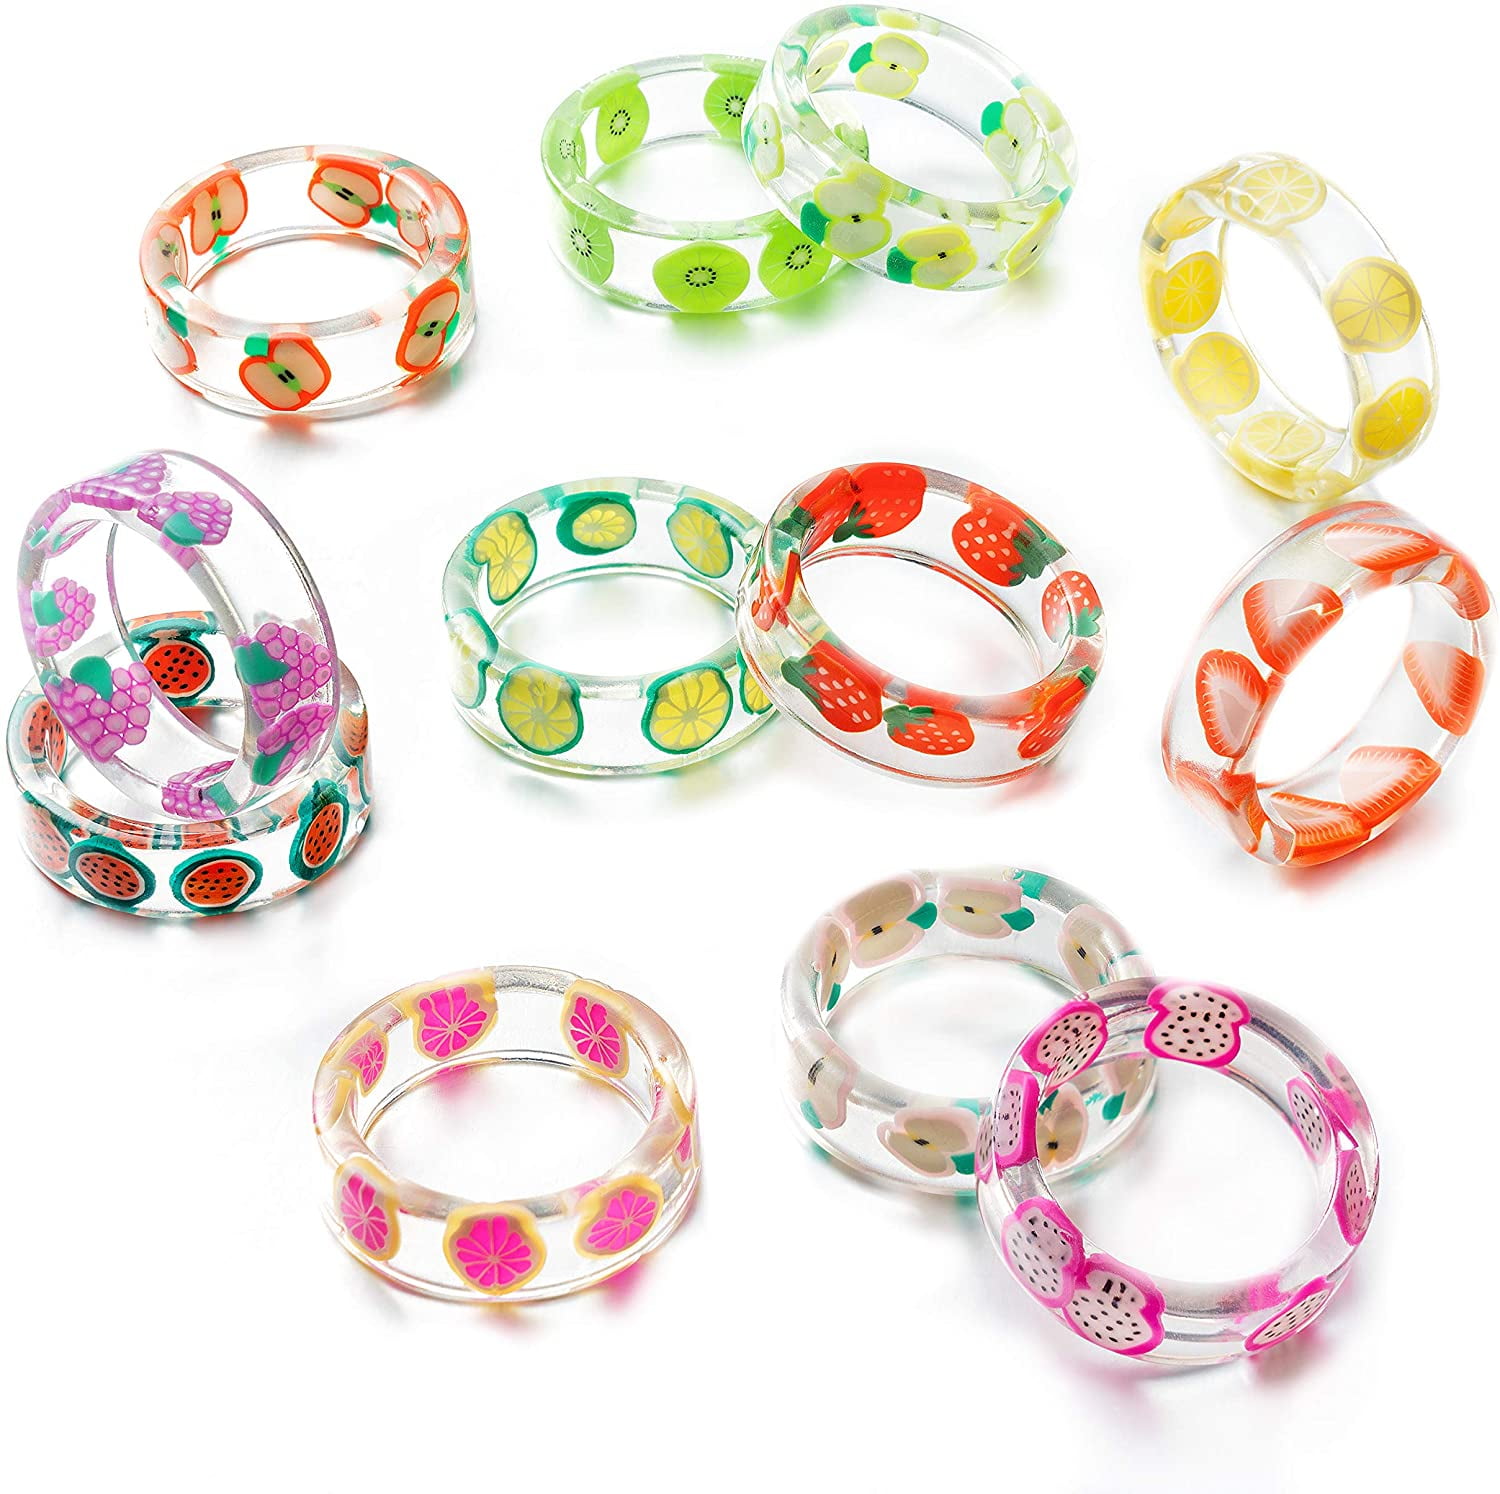 12pcs Handmade Resin Rings Toy for Girls Cute Design and Vibrant Colors 